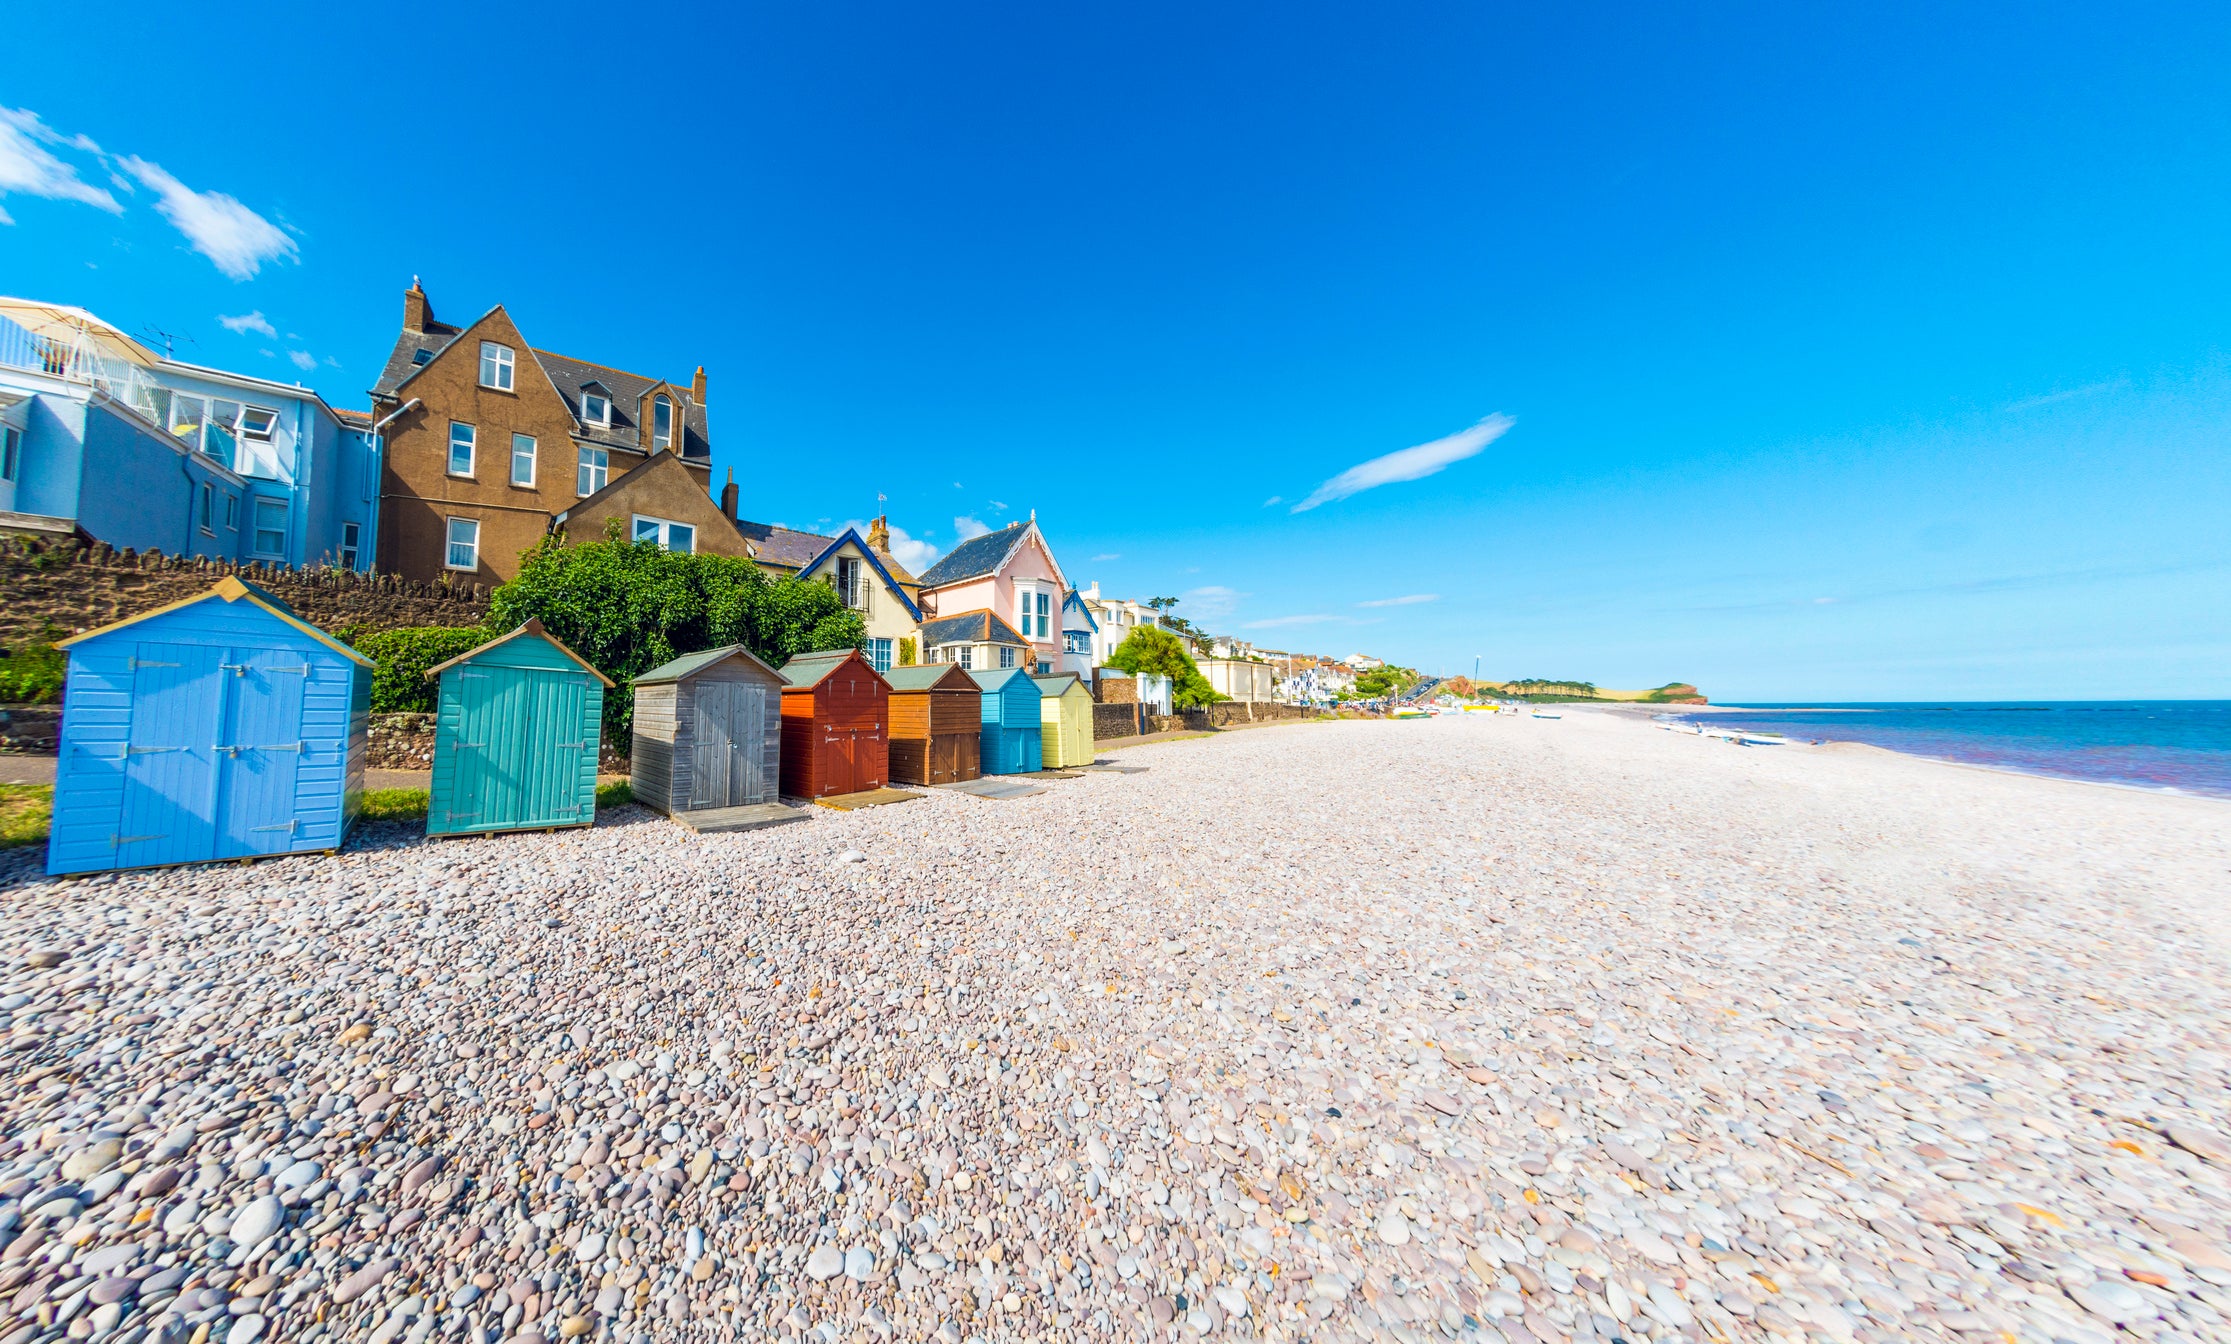 Beach huts on the golden sands of Budleigh Salterton, near Exmouth in Devon (iStock)